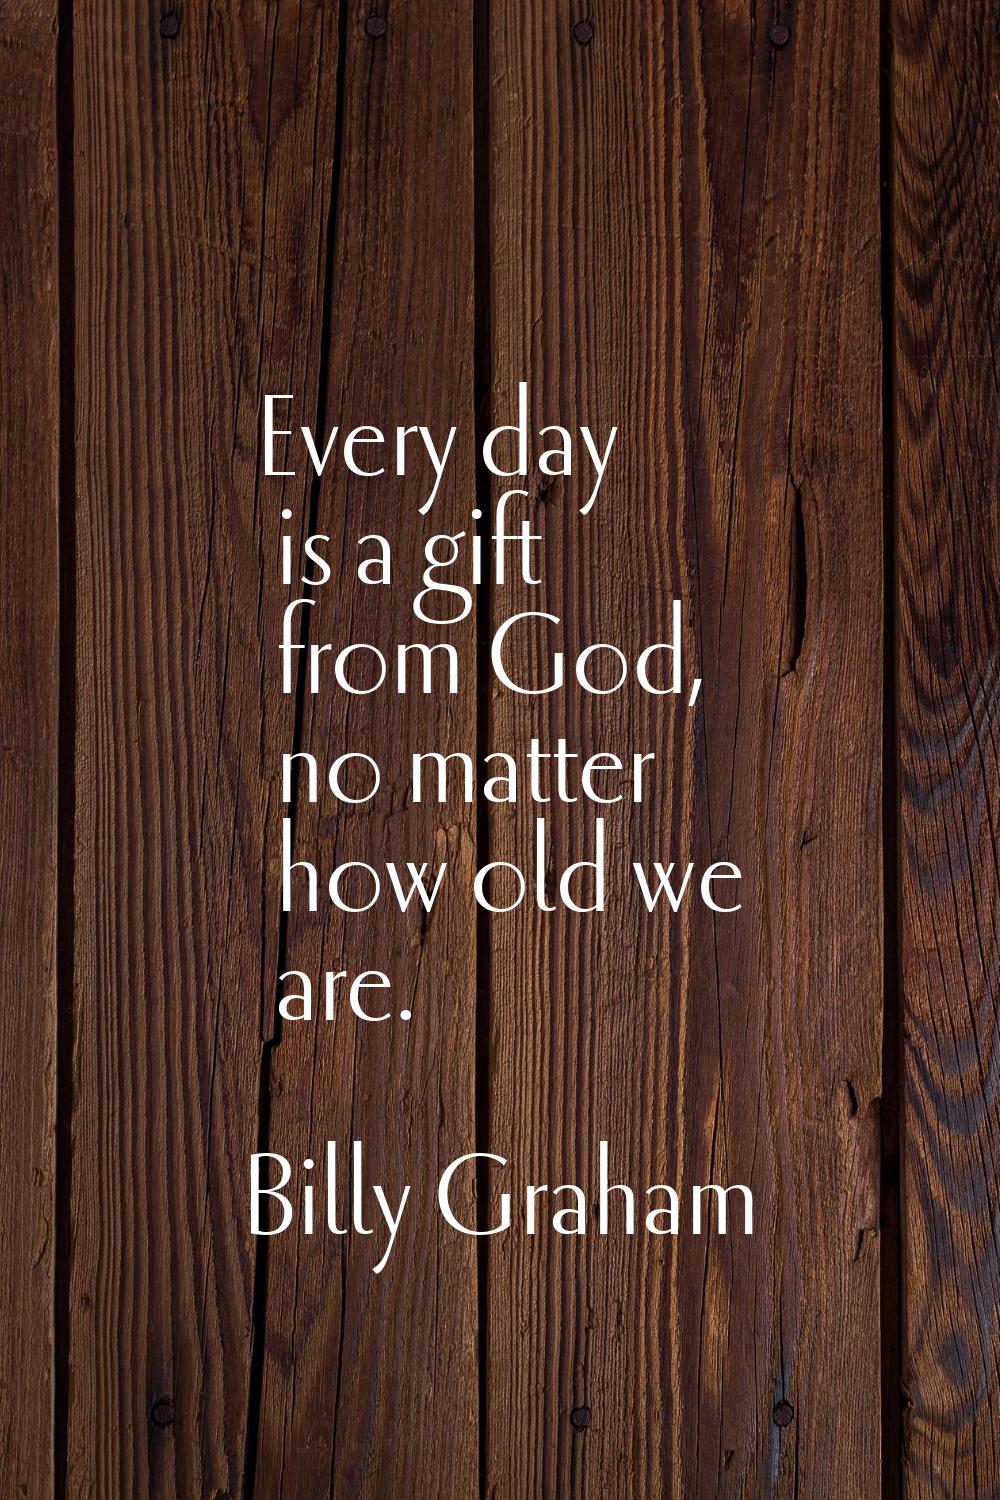 Every day is a gift from God, no matter how old we are.